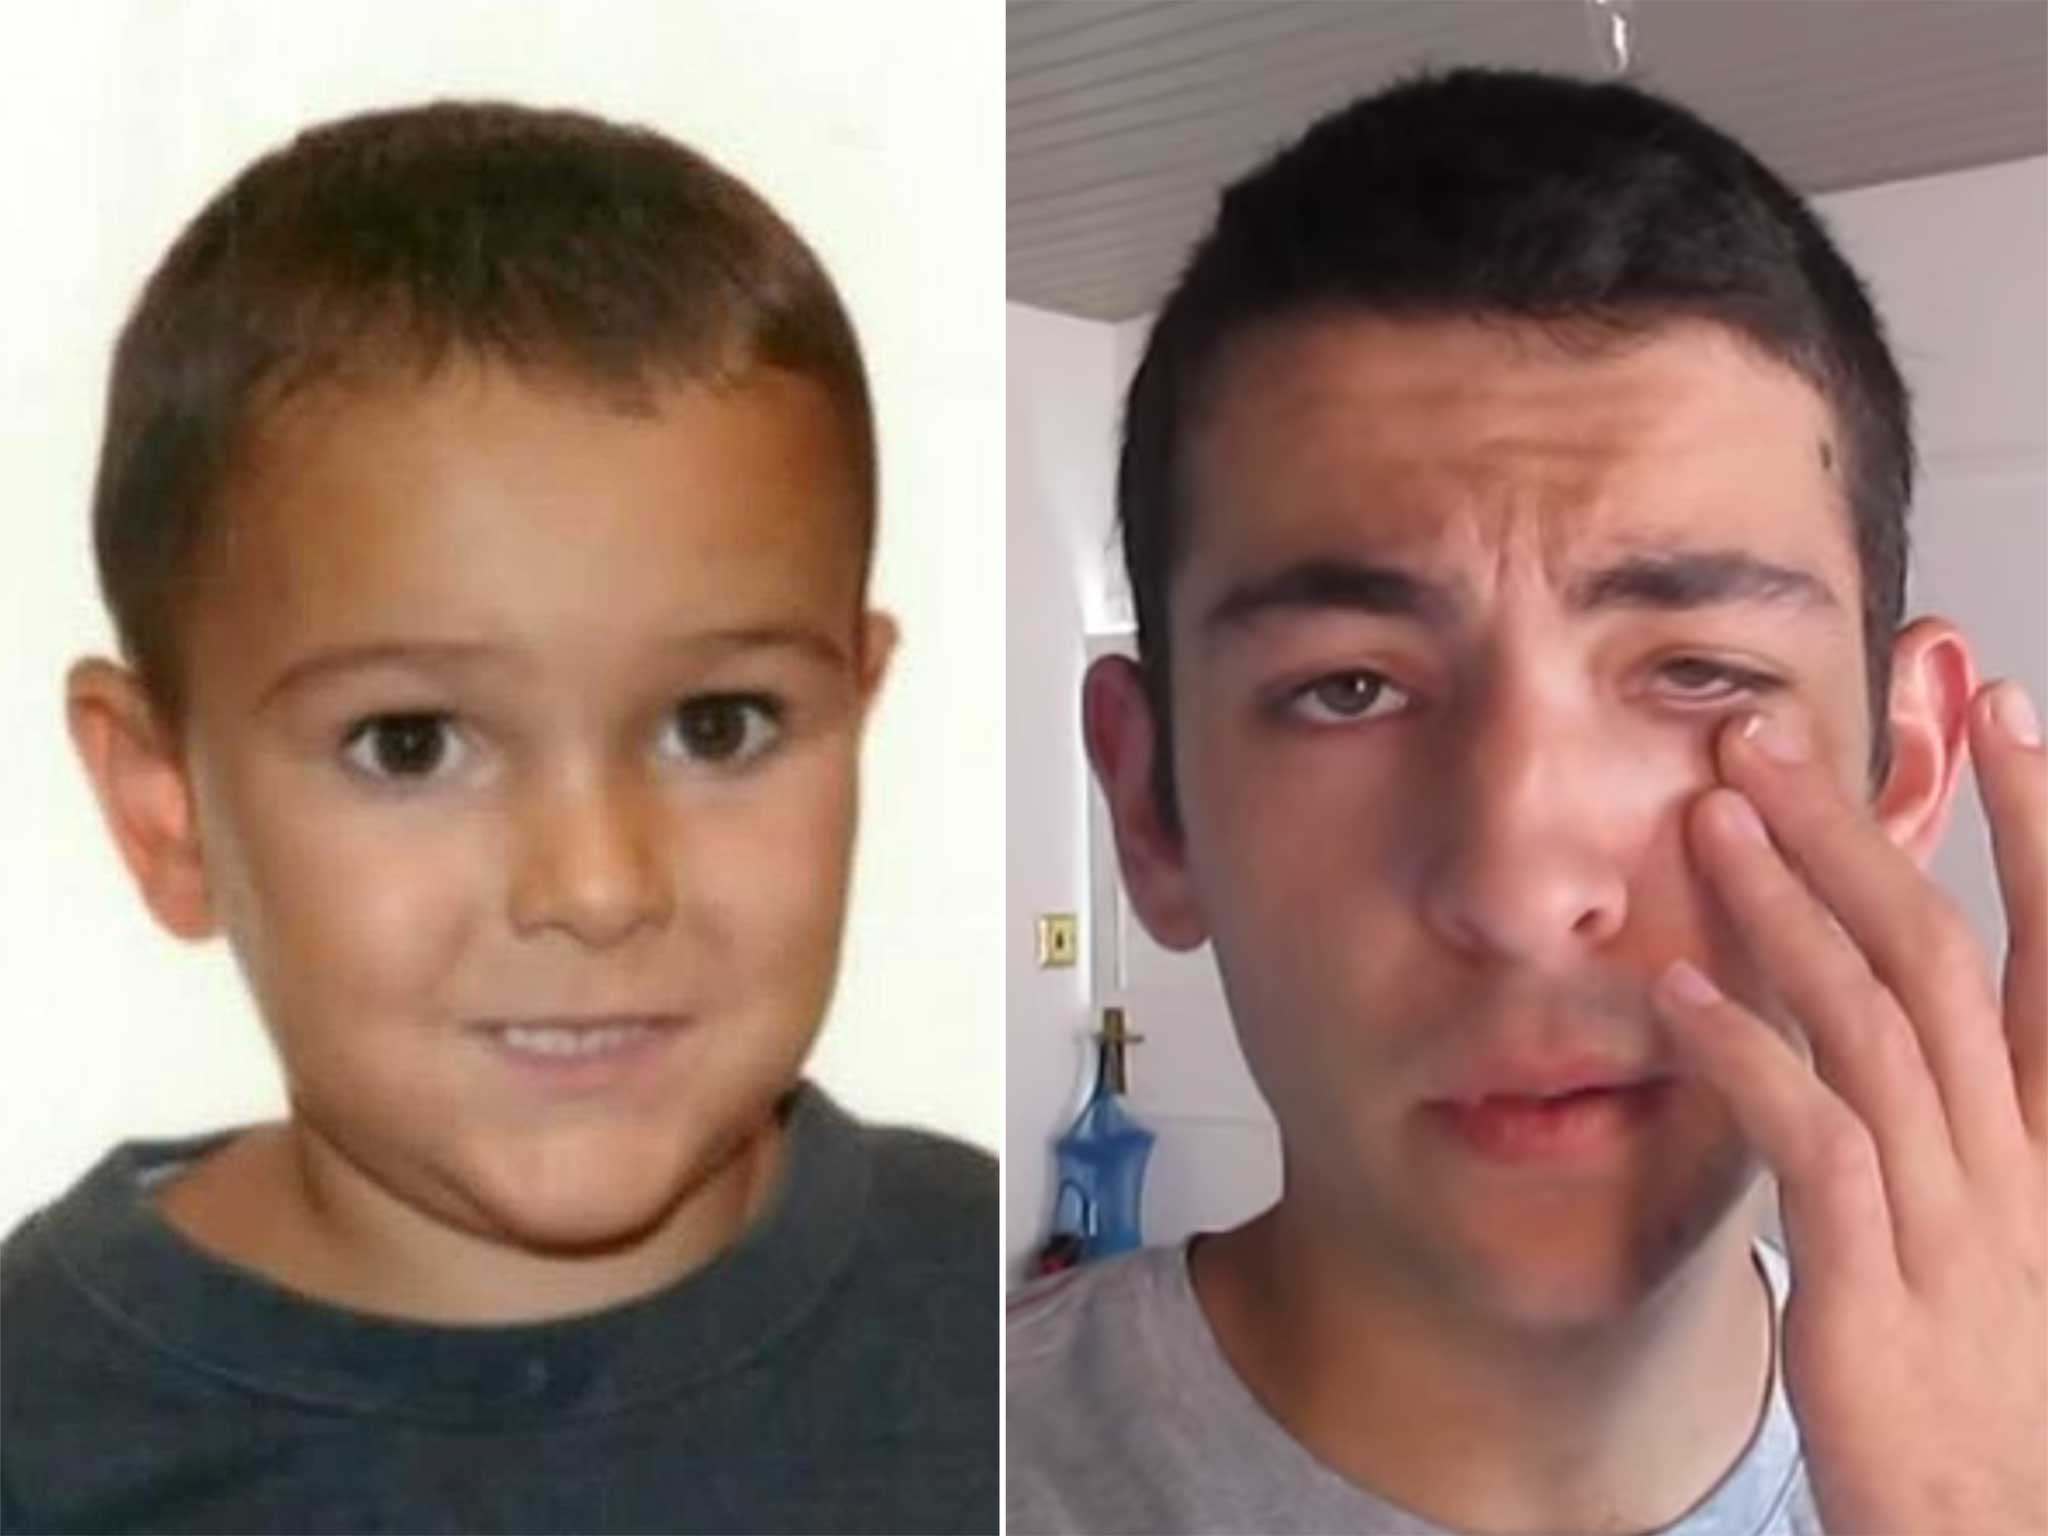 Missing boy Ashya King and his brother Naveed